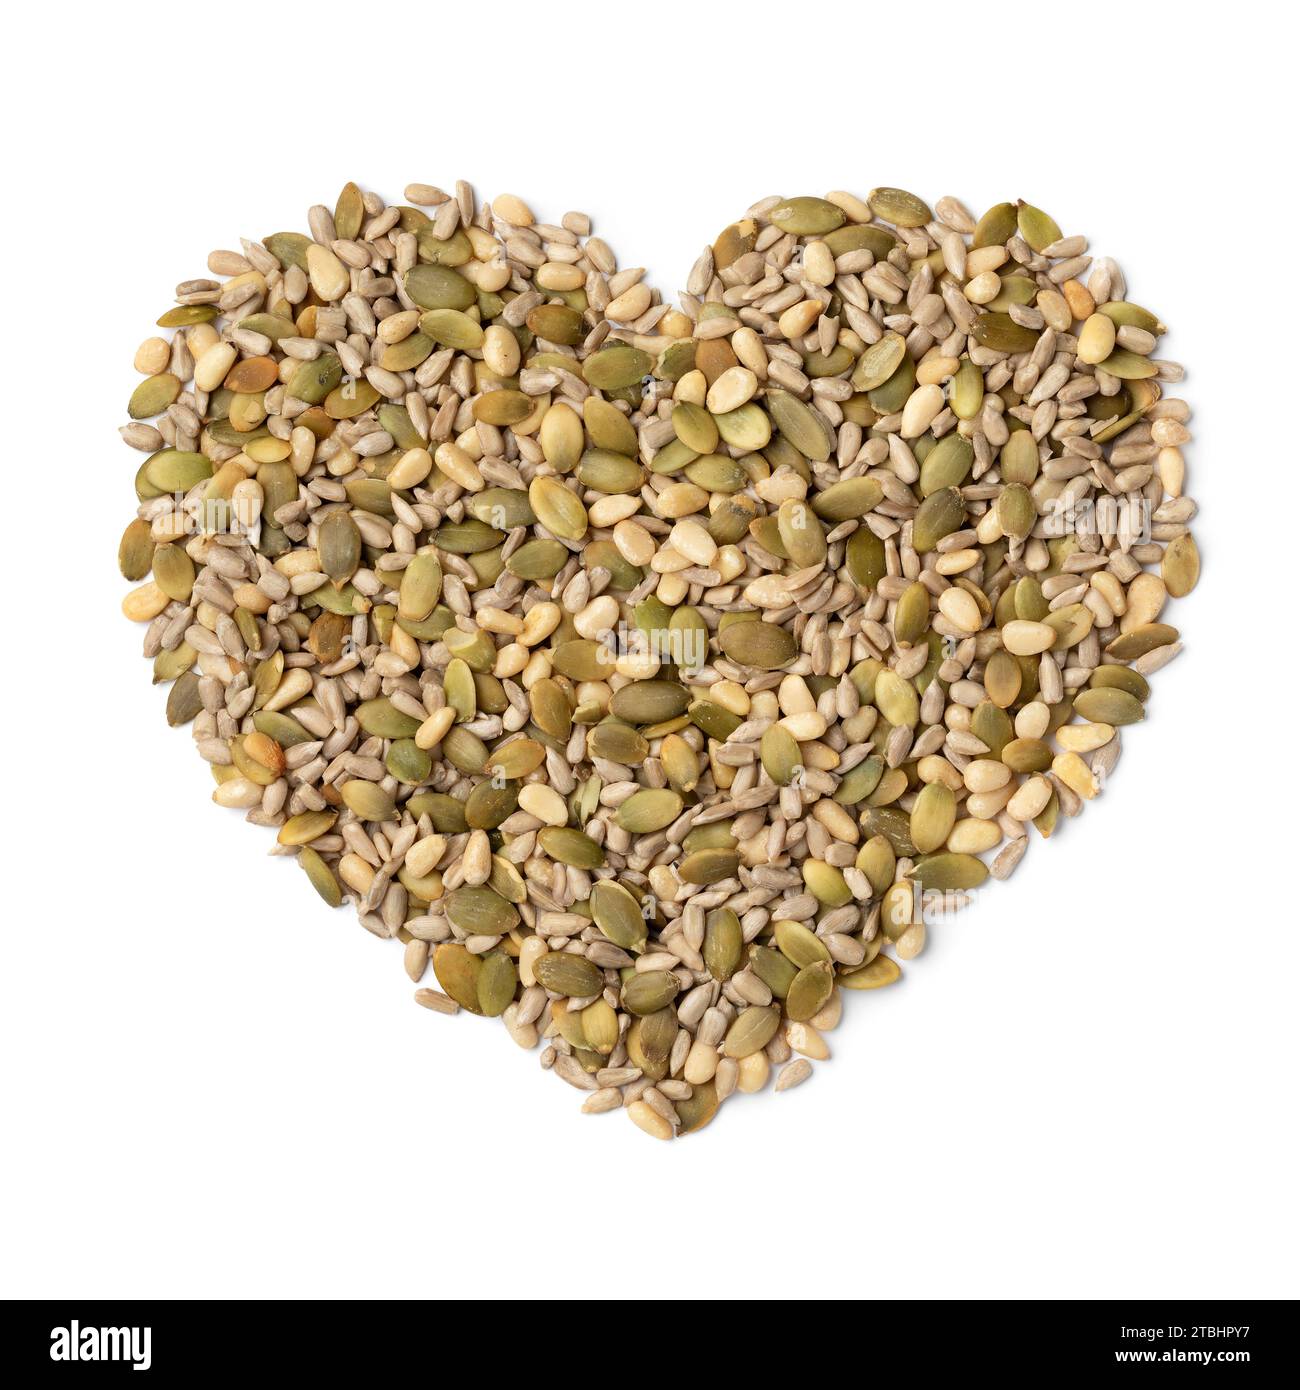 Mixture of dried salad seeds in heart shape isolated on white background close up Stock Photo